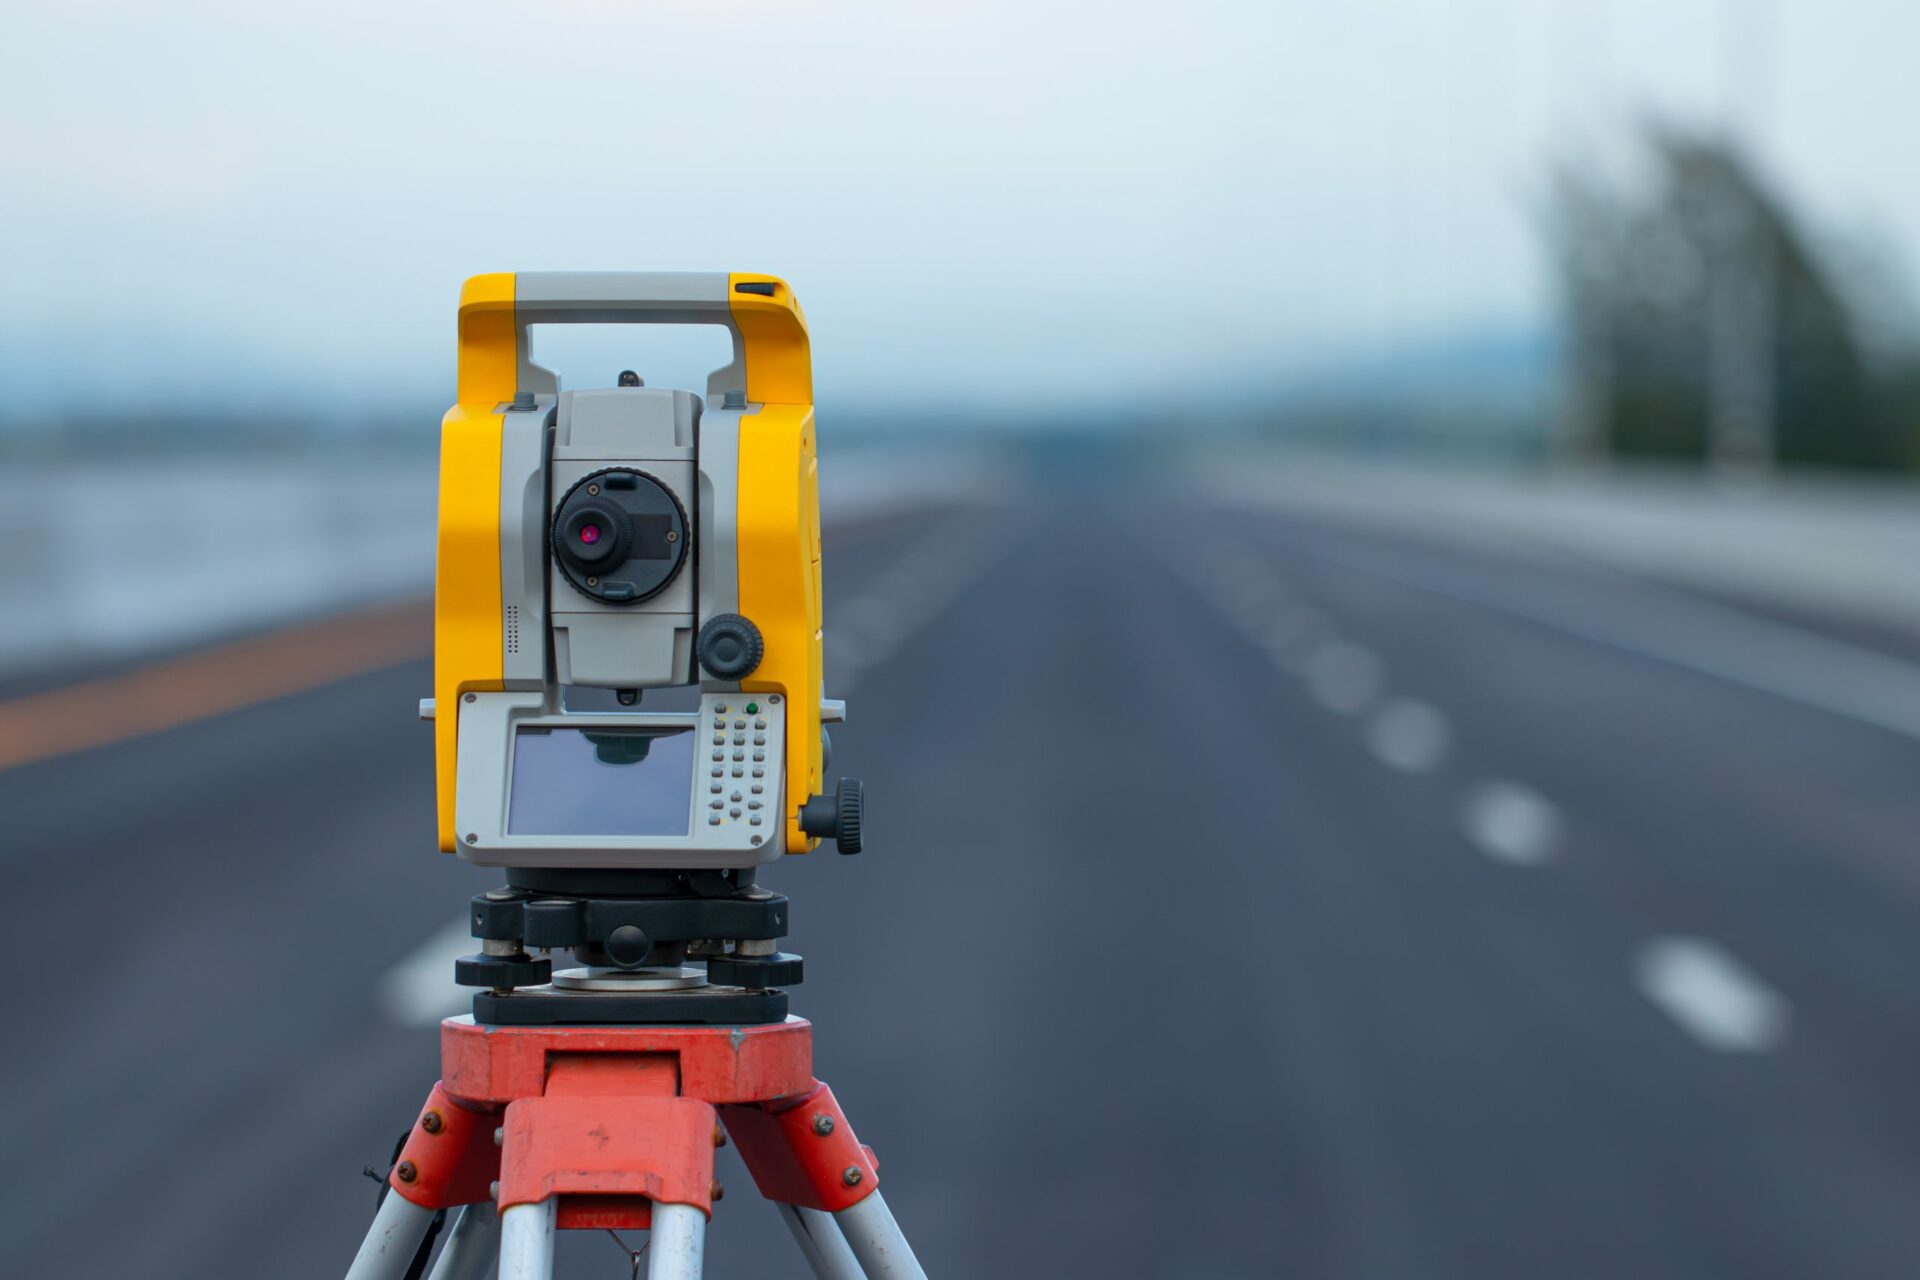 Theodolite in construction, Land surveying and construction equipment